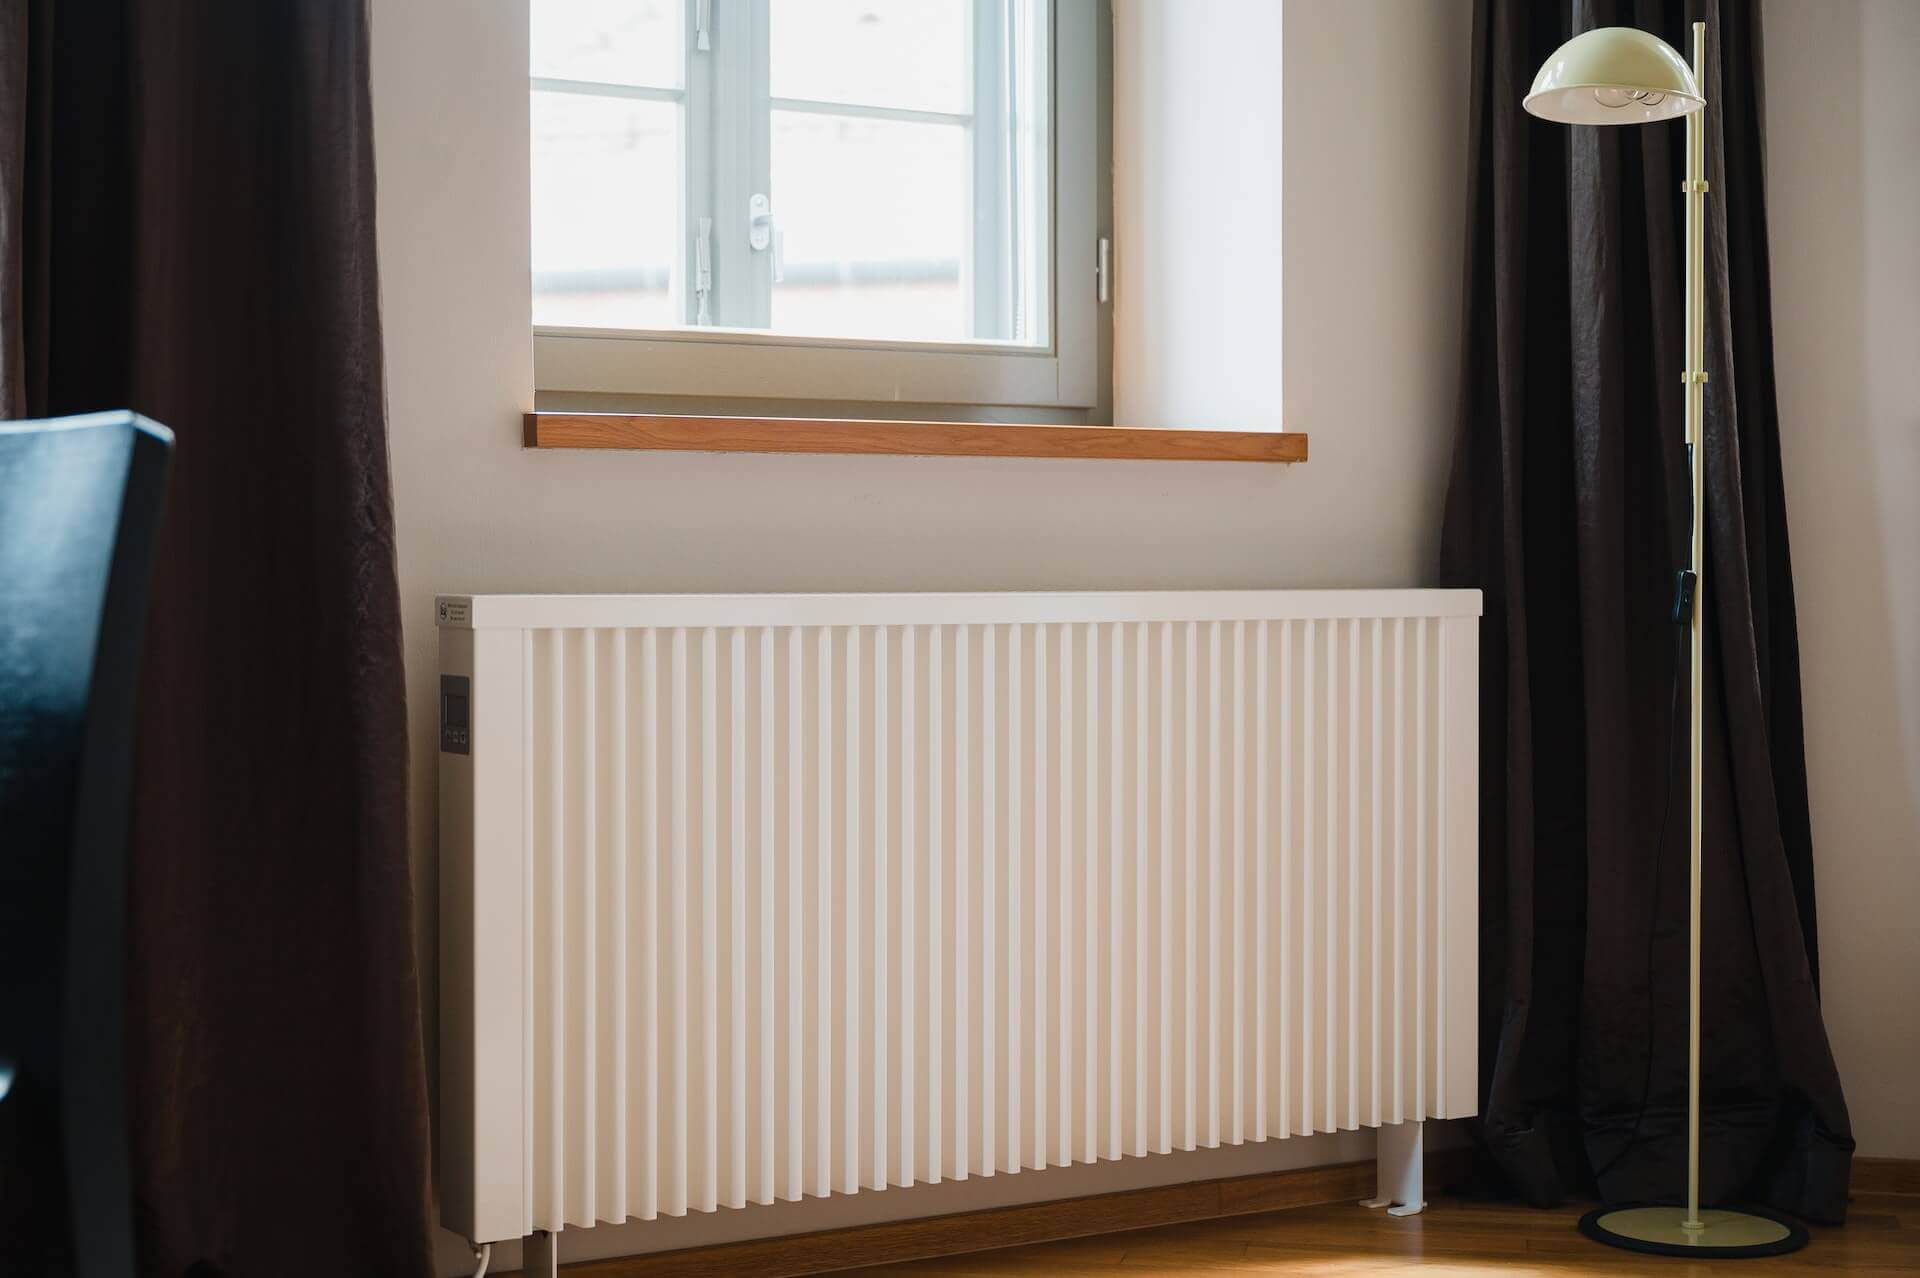 radiator under the window with curtains